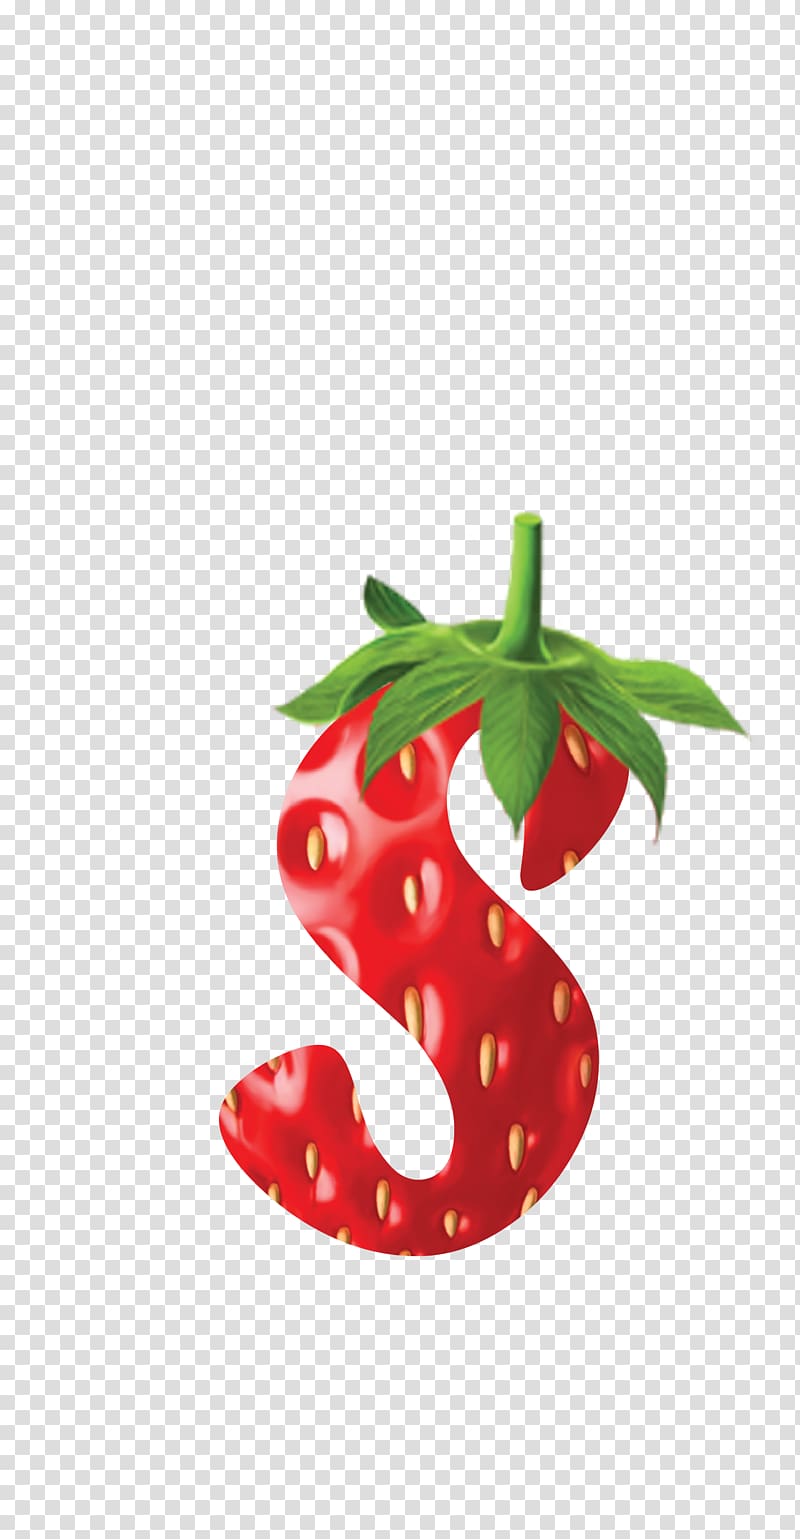 Strawberry Logo Fruit Food Graphic design, watercolor strawberry transparent background PNG clipart